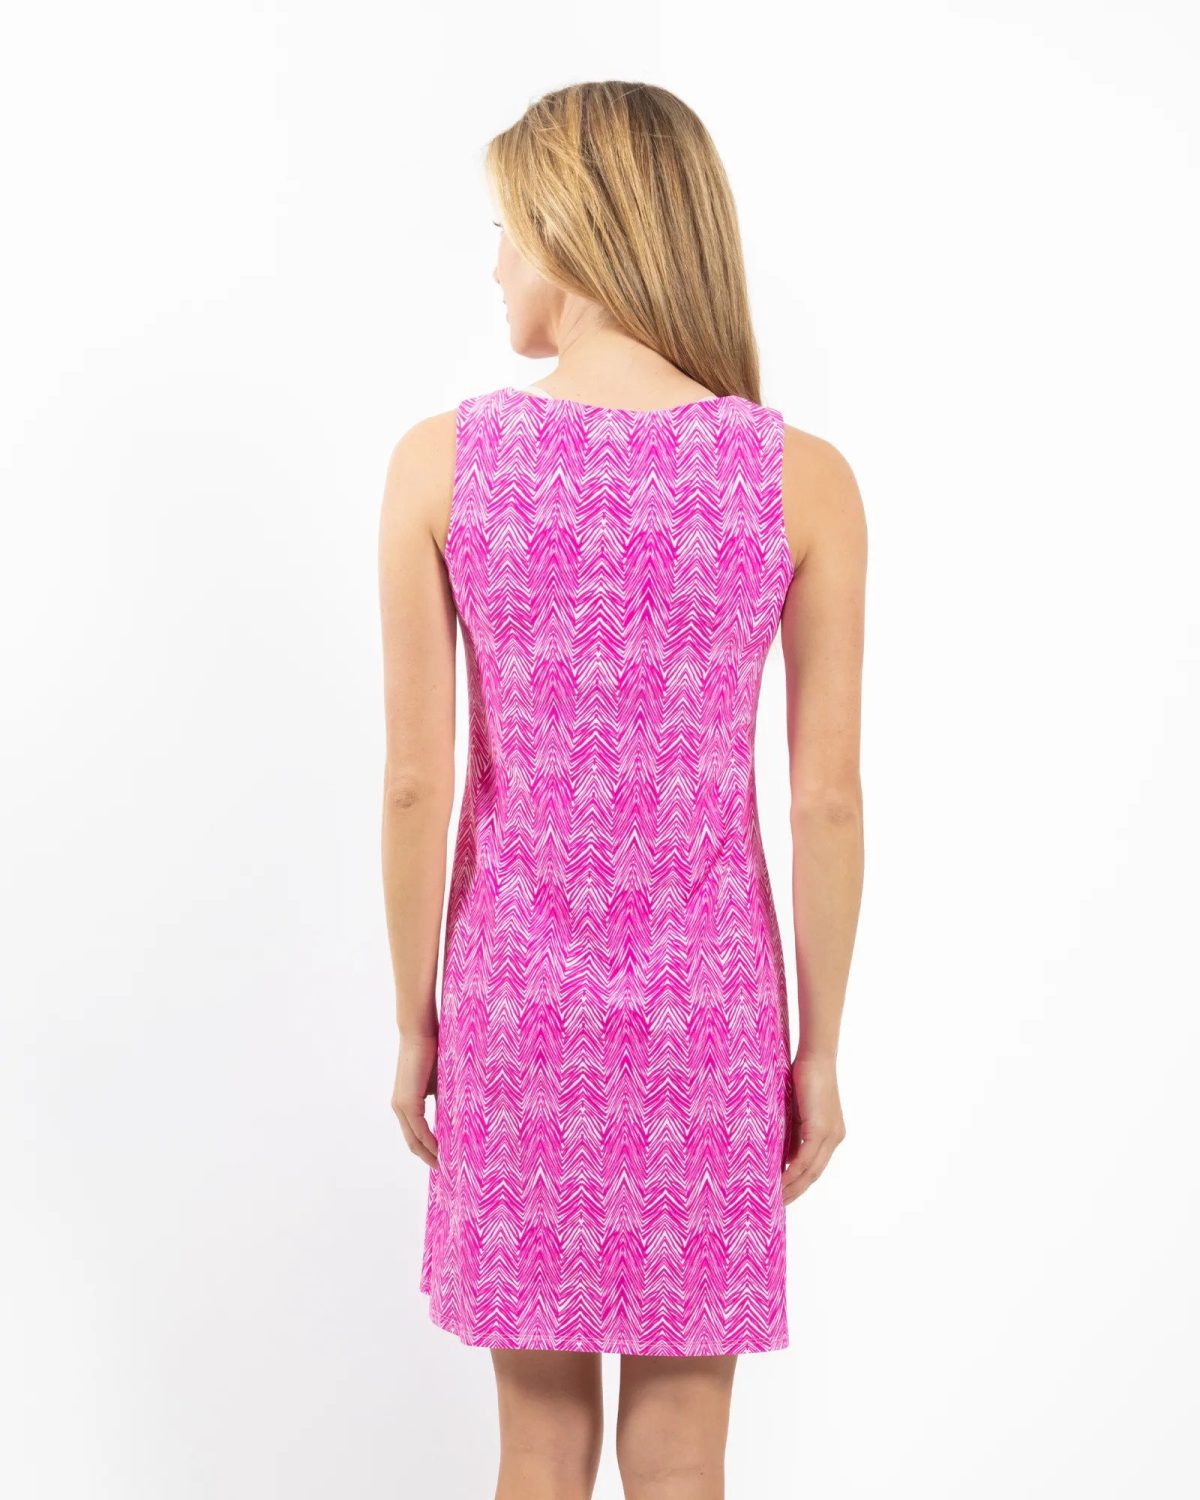 Jude Connally 101110 Herringbone Hot Pink Sleeveless Sheath Dress | Ooh Ooh Shoes woman's clothing and shoe boutique located in Naples, Charleston and Mashpee